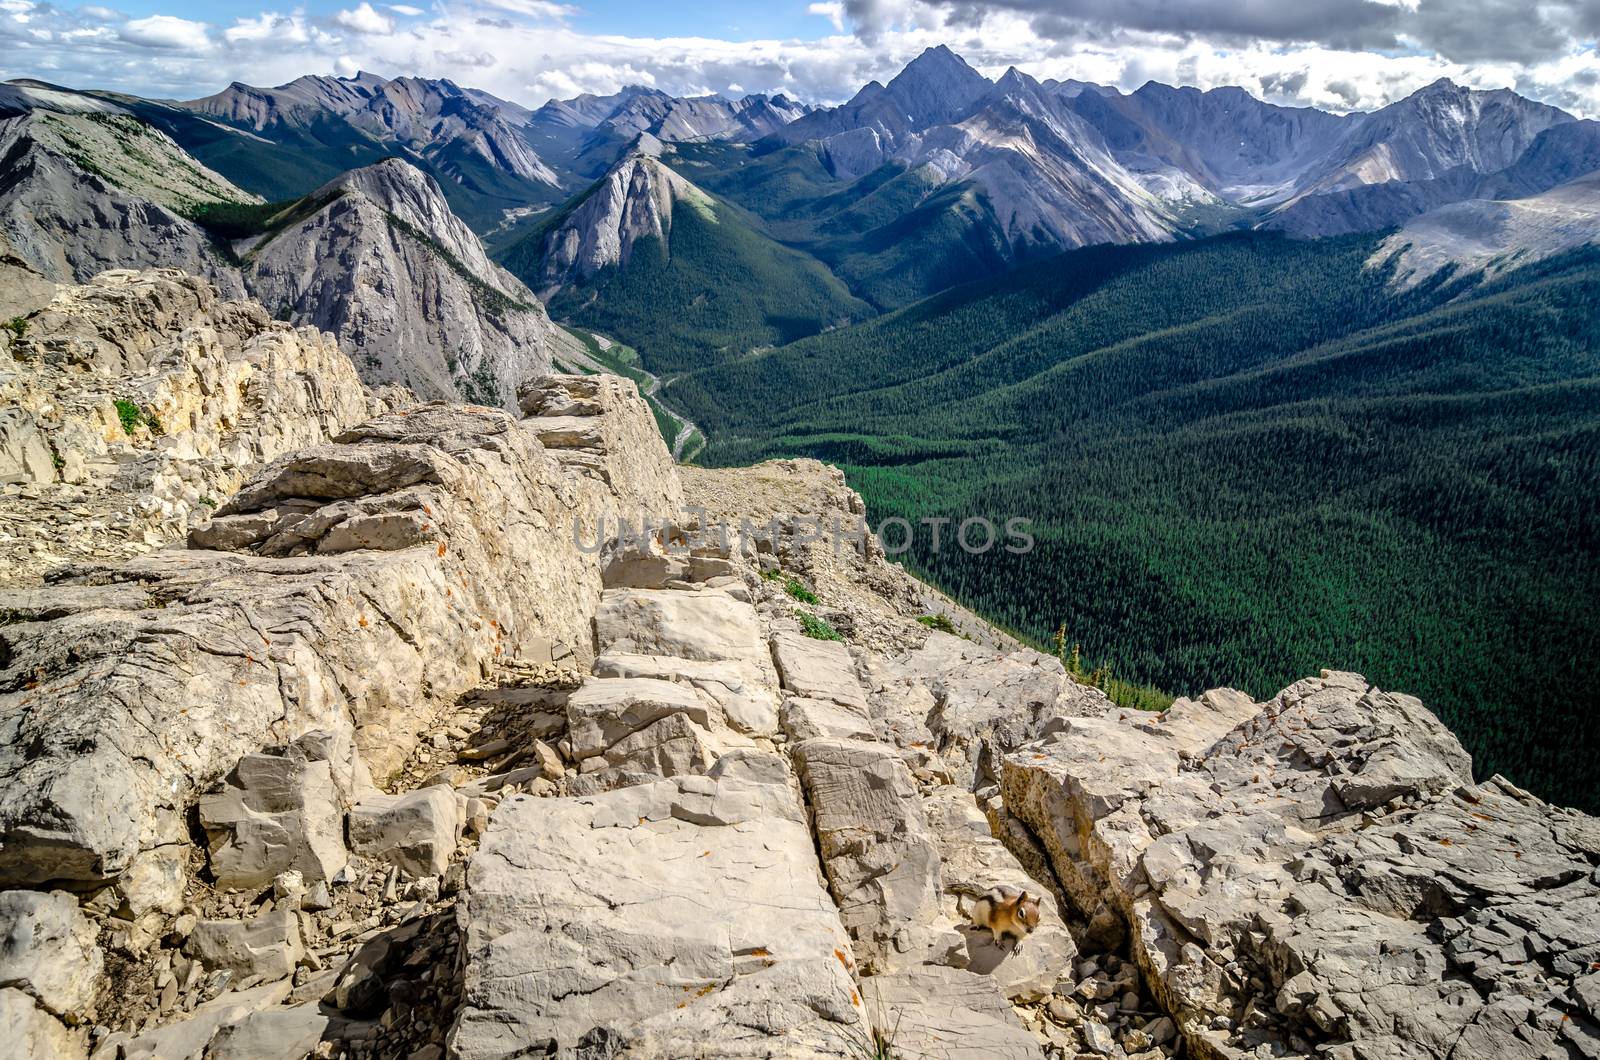 Mountains range view in Jasper NP with chipmunk in foreground, Alberta, Canada